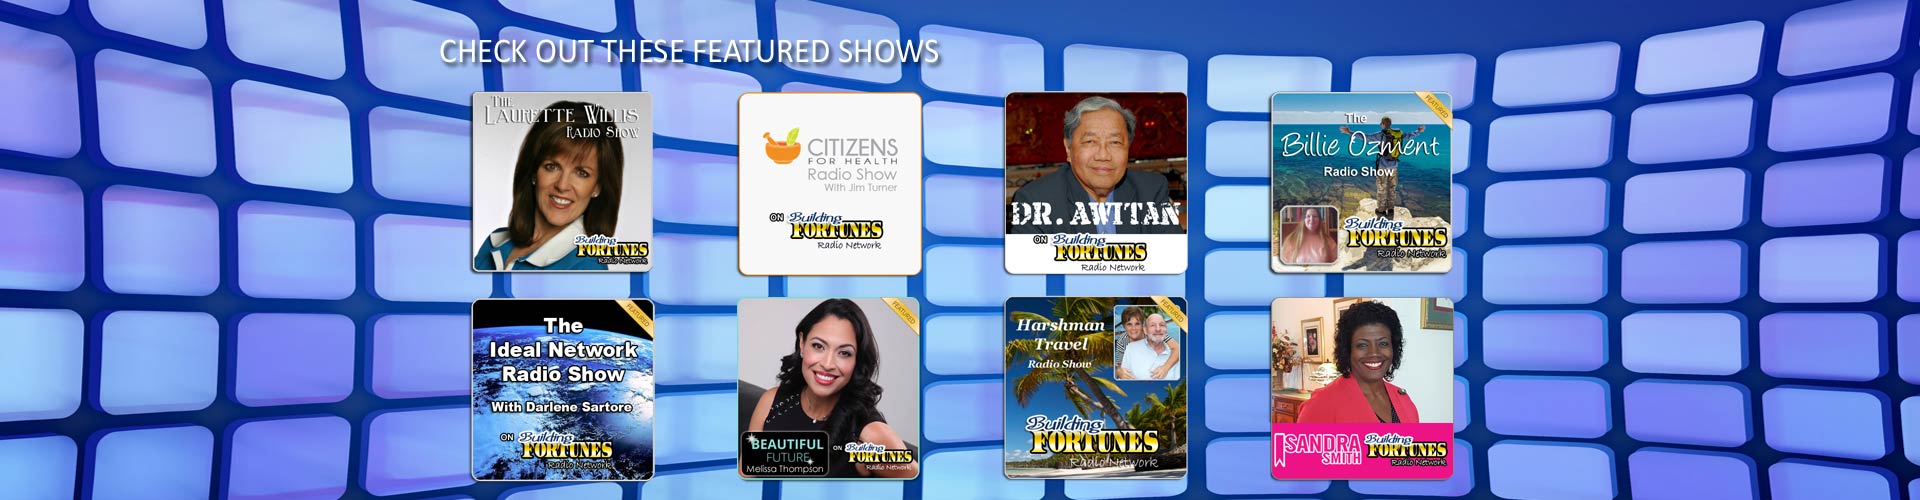 Check Out These Featured Shows on Building Fortunes Radio Network